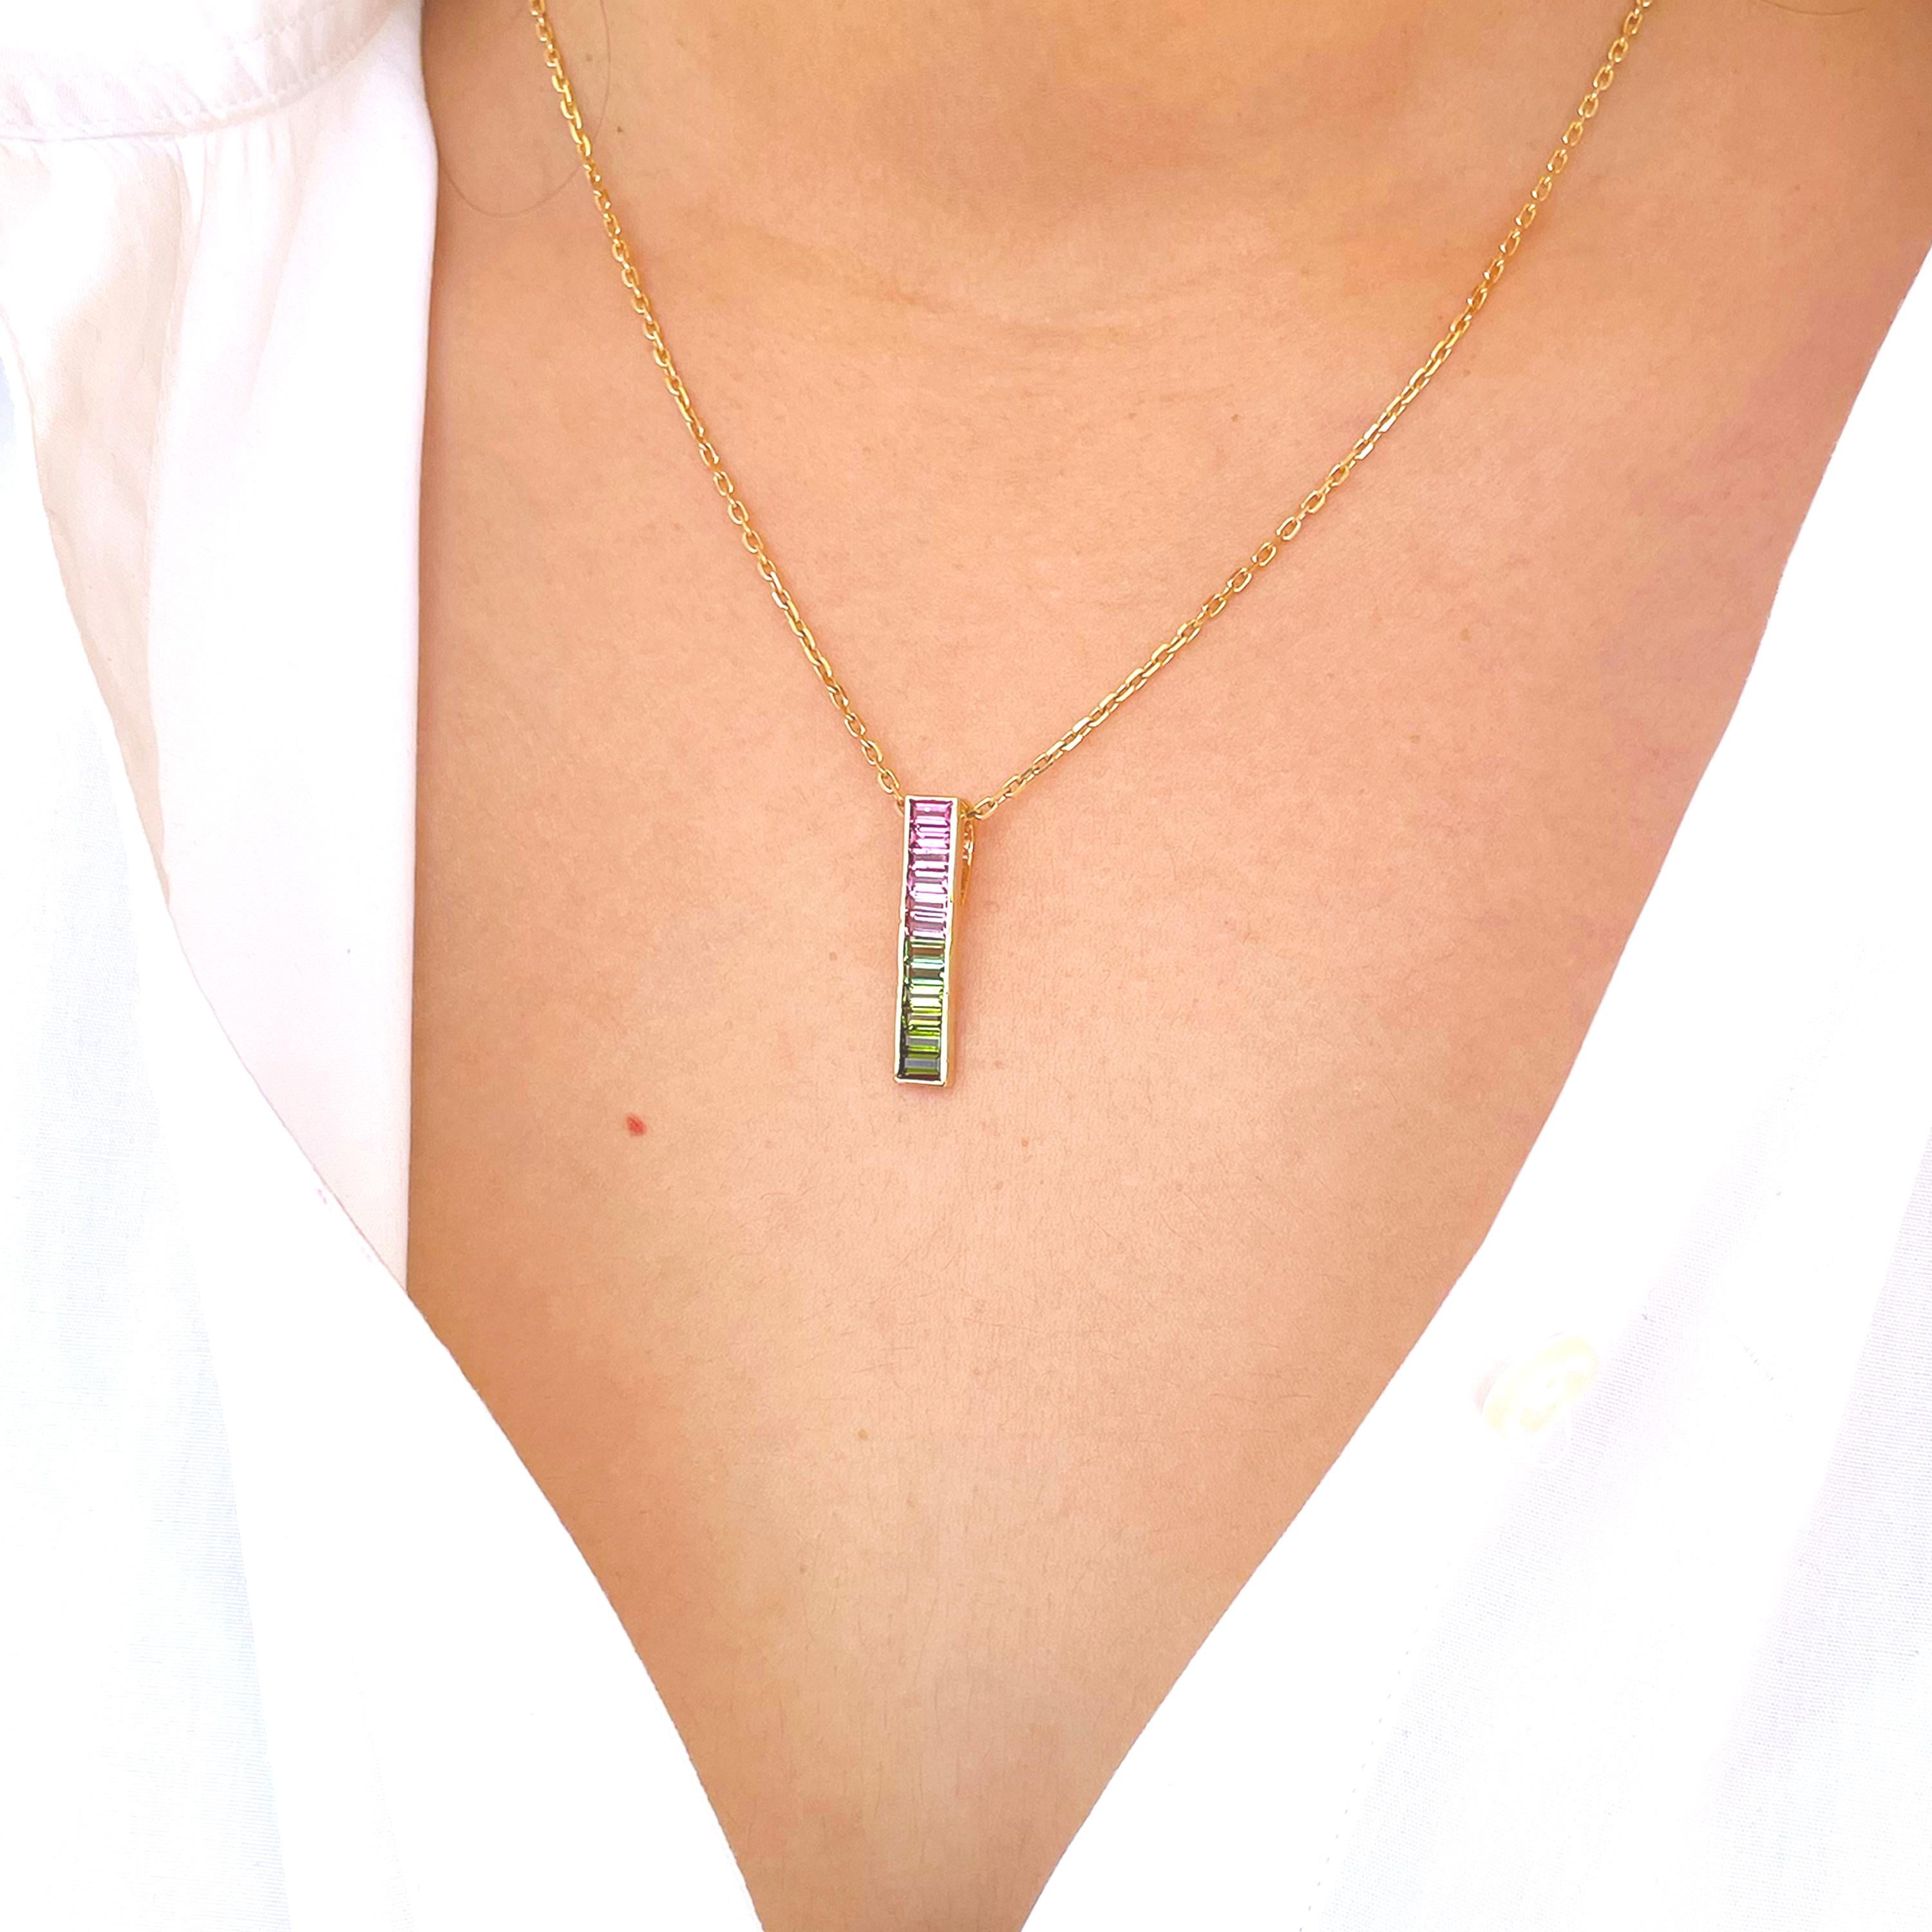 18 karat yellow gold green pink bi-tourmaline tourmaline linear watermelon bar pendant necklace.

Add something special to your jewellery box with the unique watermelon tourmaline bar pendant. Set in 18 karat gold, this classic linear design